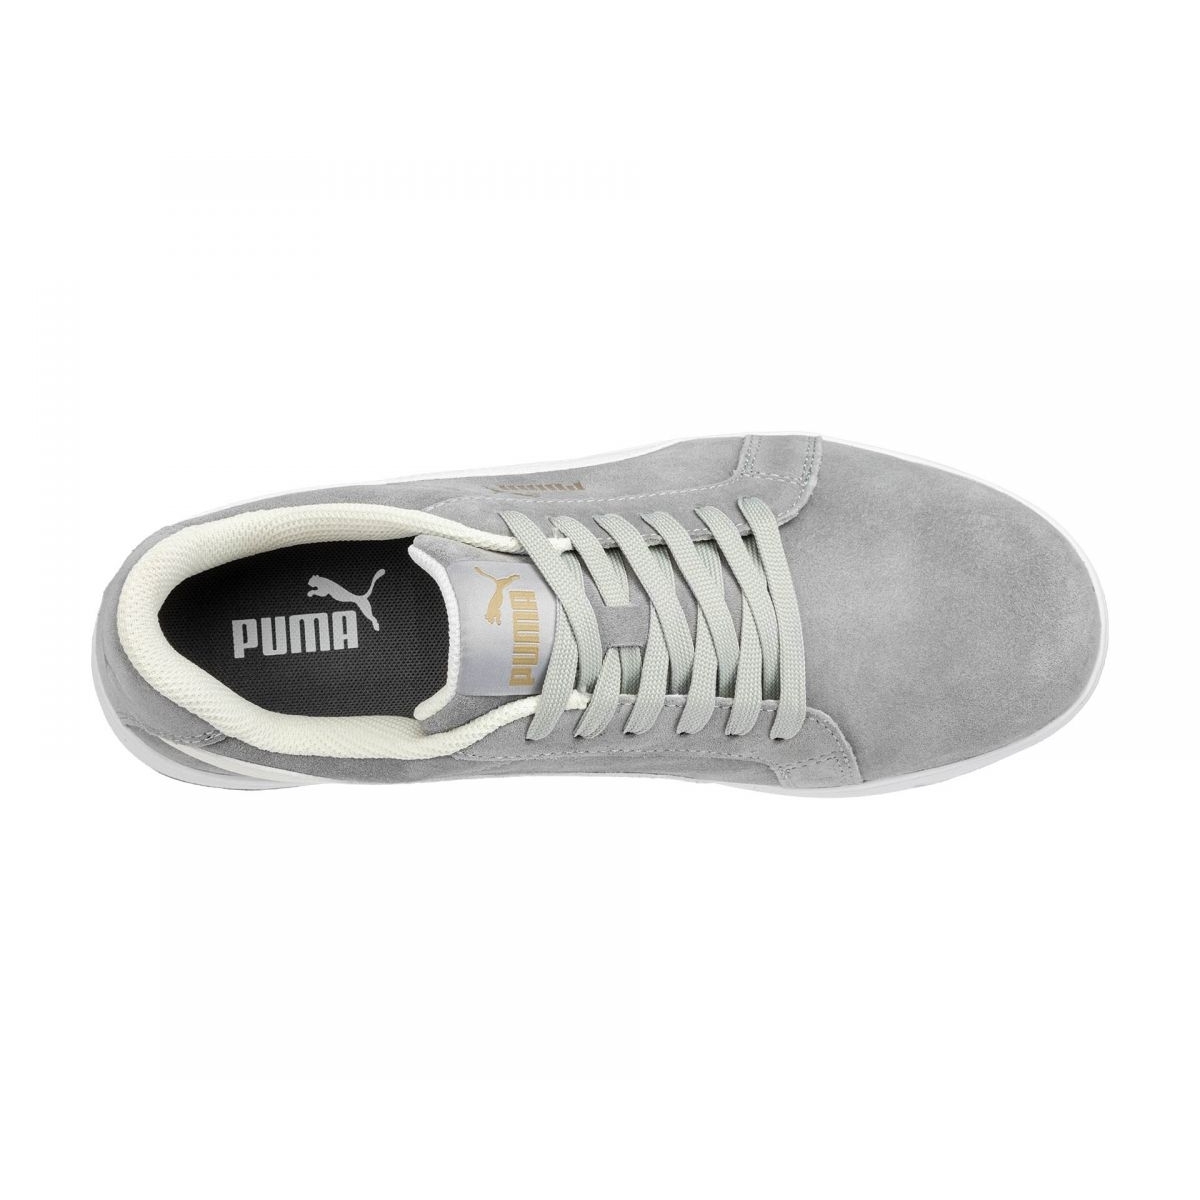 PUMA Safety Women's Iconic Low Composite Toe SD Work Shoes Grey Suede - 640125 Grey - Grey, 8